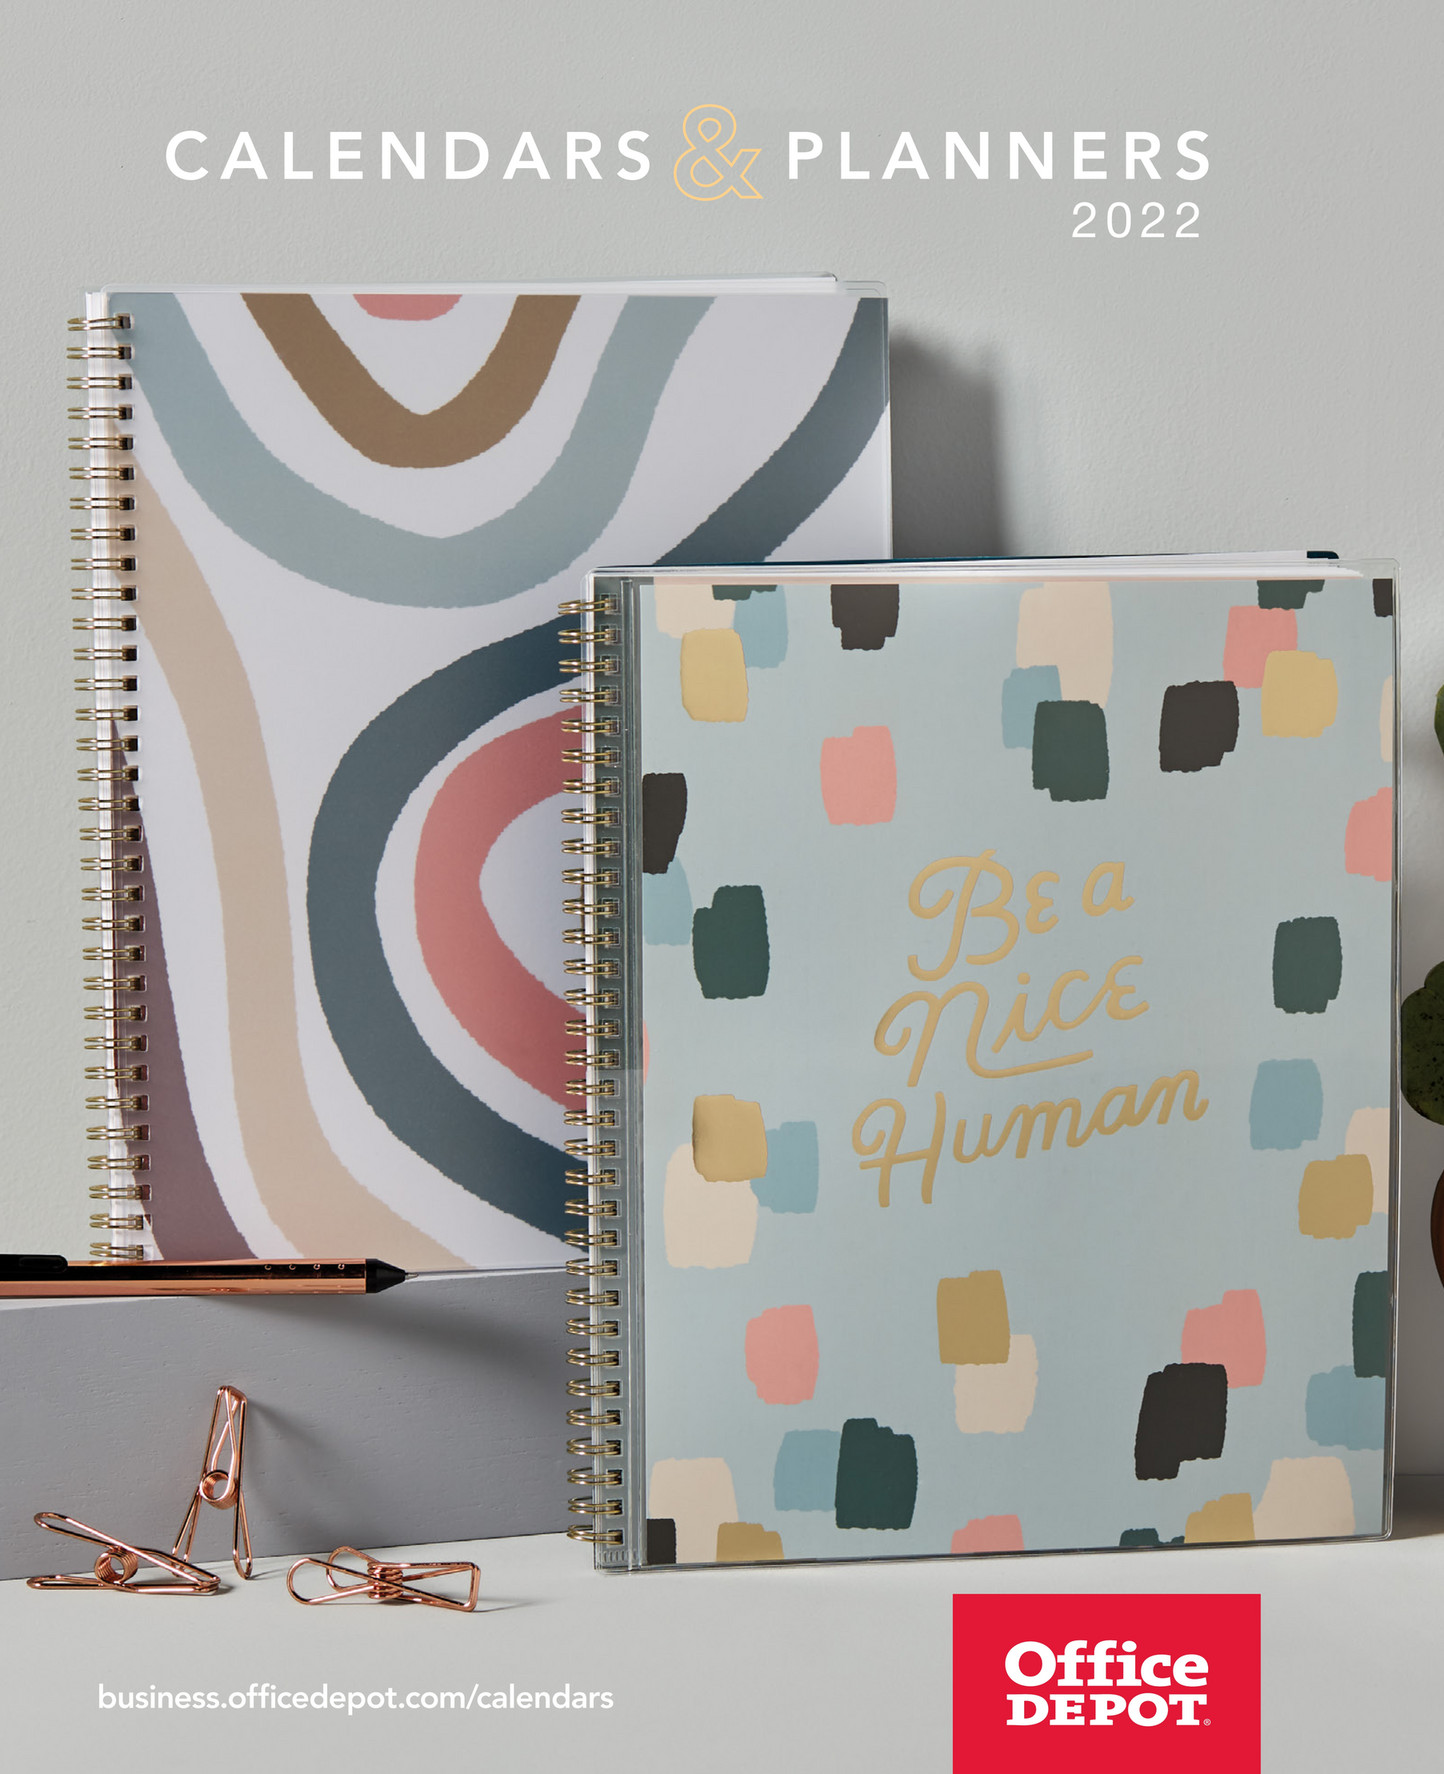 office-depot-calendars-planners-2022-page-1